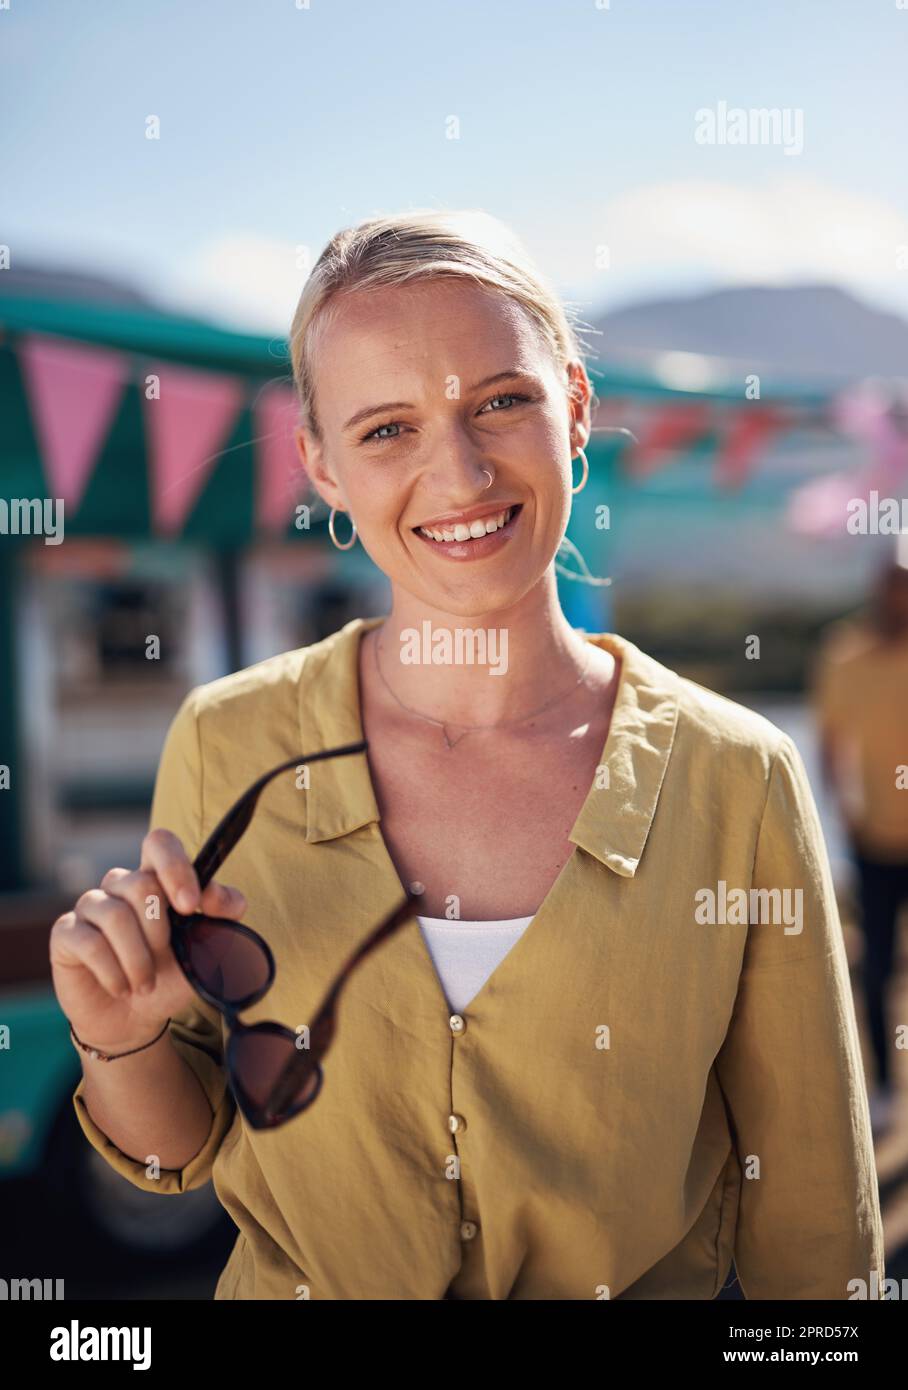 Do you recognise me now. Portrait of a cheerful young woman smiling brightly while standing outside on a beach promenade during the day. Stock Photo